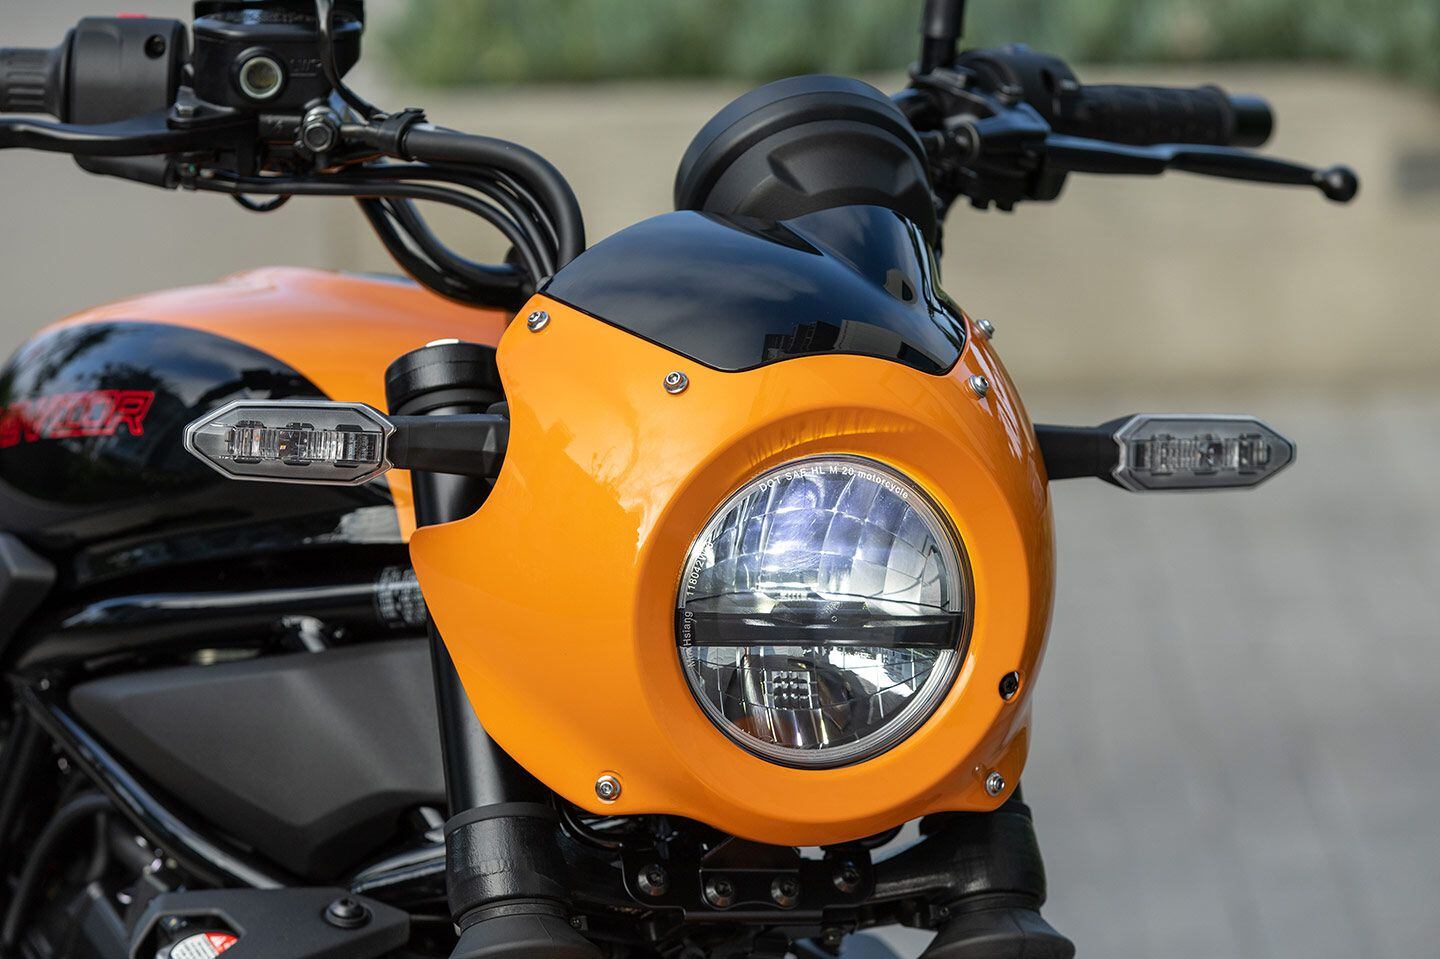 A 130mm LED headlight is fitted on all three Eliminator models. The upscale SE model features a color-matched headlight cowl.